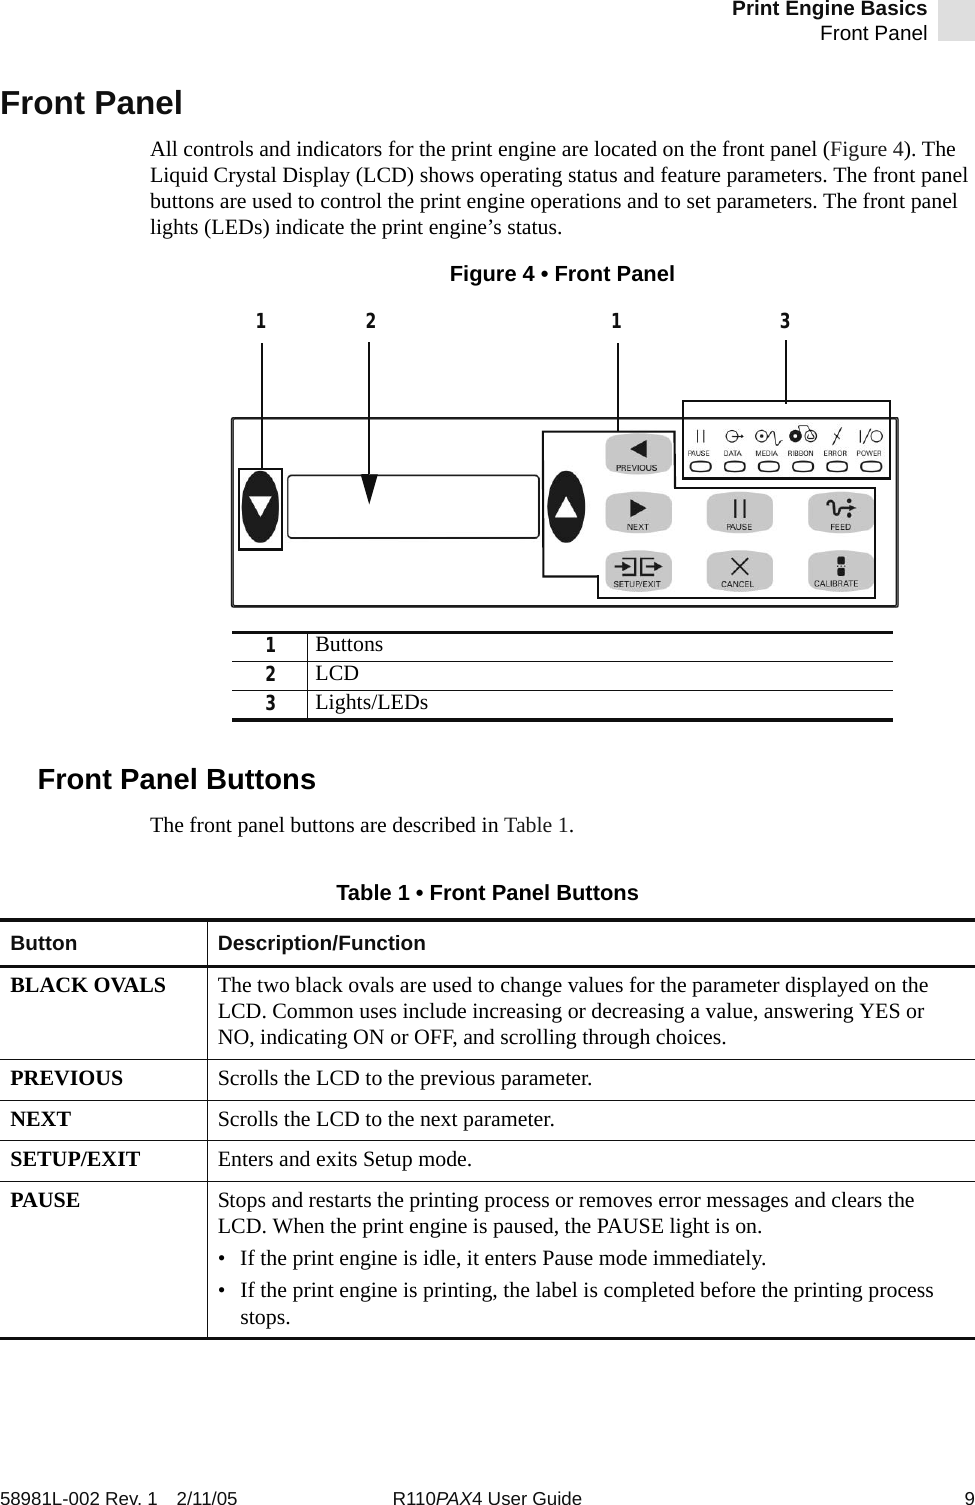 Print Engine BasicsFront Panel58981L-002 Rev. 1 2/11/05 R110PAX4 User Guide 9Front PanelAll controls and indicators for the print engine are located on the front panel (Figure 4). The Liquid Crystal Display (LCD) shows operating status and feature parameters. The front panel buttons are used to control the print engine operations and to set parameters. The front panel lights (LEDs) indicate the print engine’s status.Figure 4 • Front PanelFront Panel ButtonsThe front panel buttons are described in Table 1.1Buttons2LCD3Lights/LEDs2 1 31Table 1 • Front Panel ButtonsButton Description/FunctionBLACK OVALS The two black ovals are used to change values for the parameter displayed on the LCD. Common uses include increasing or decreasing a value, answering YES or NO, indicating ON or OFF, and scrolling through choices.PREVIOUS Scrolls the LCD to the previous parameter.NEXT Scrolls the LCD to the next parameter.SETUP/EXIT Enters and exits Setup mode.PAUSE Stops and restarts the printing process or removes error messages and clears the LCD. When the print engine is paused, the PAUSE light is on. • If the print engine is idle, it enters Pause mode immediately.• If the print engine is printing, the label is completed before the printing process stops. 